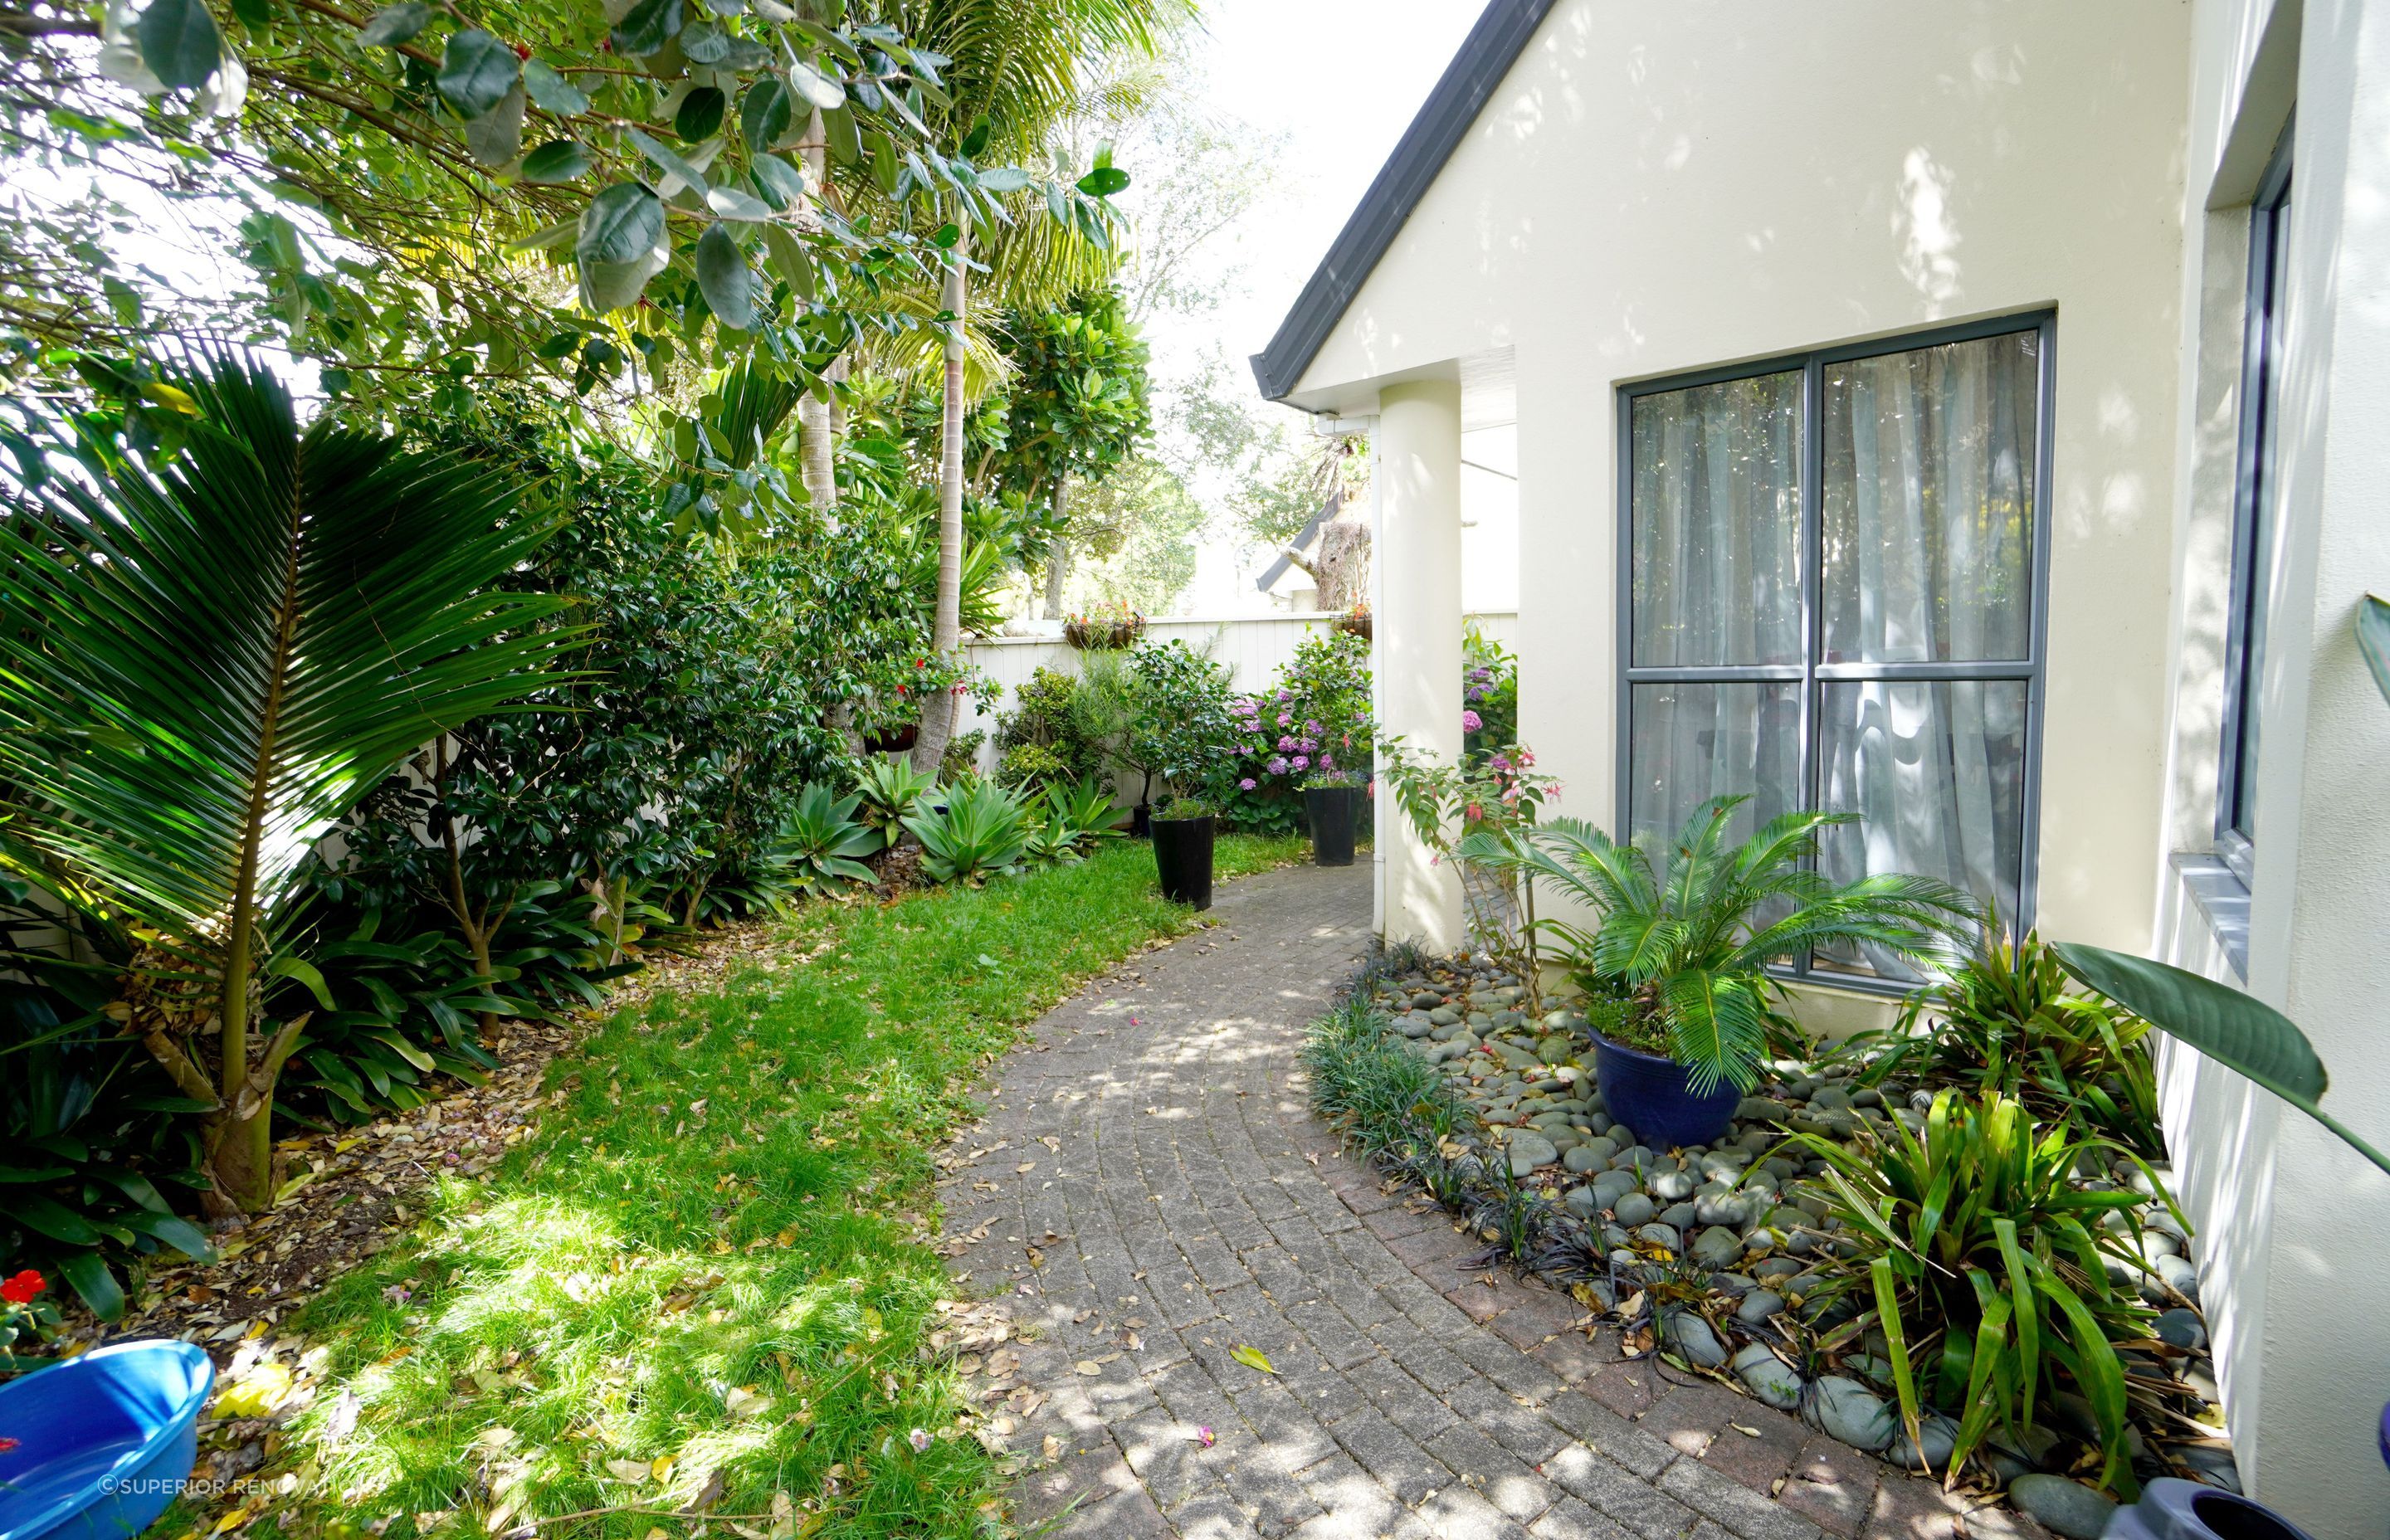 Landscaping around the house with quaint pathways and surrounding greenery in Epsom, Auckland